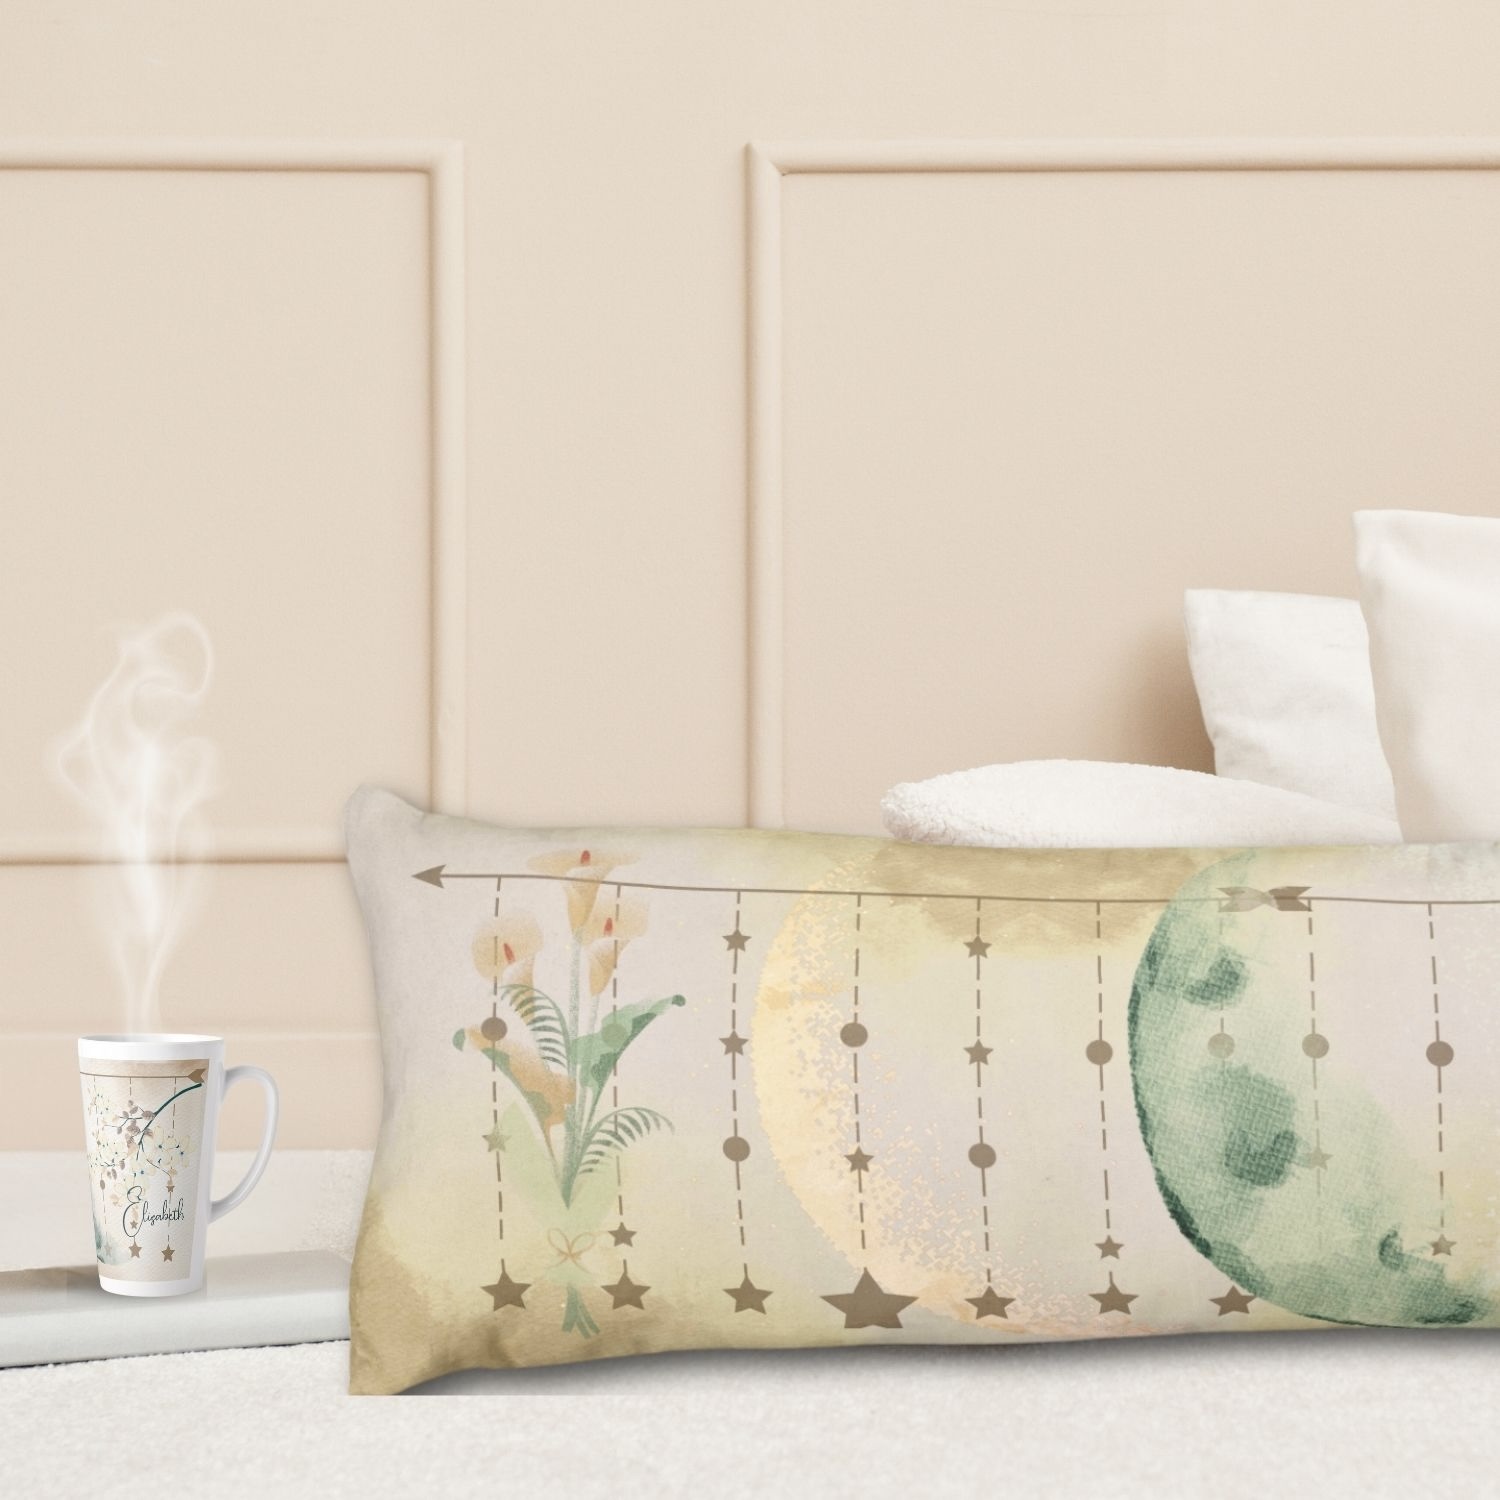 Boho earthy flowers body pillow on cozy space with a latte mug with same tranquil beige and soft blue design.